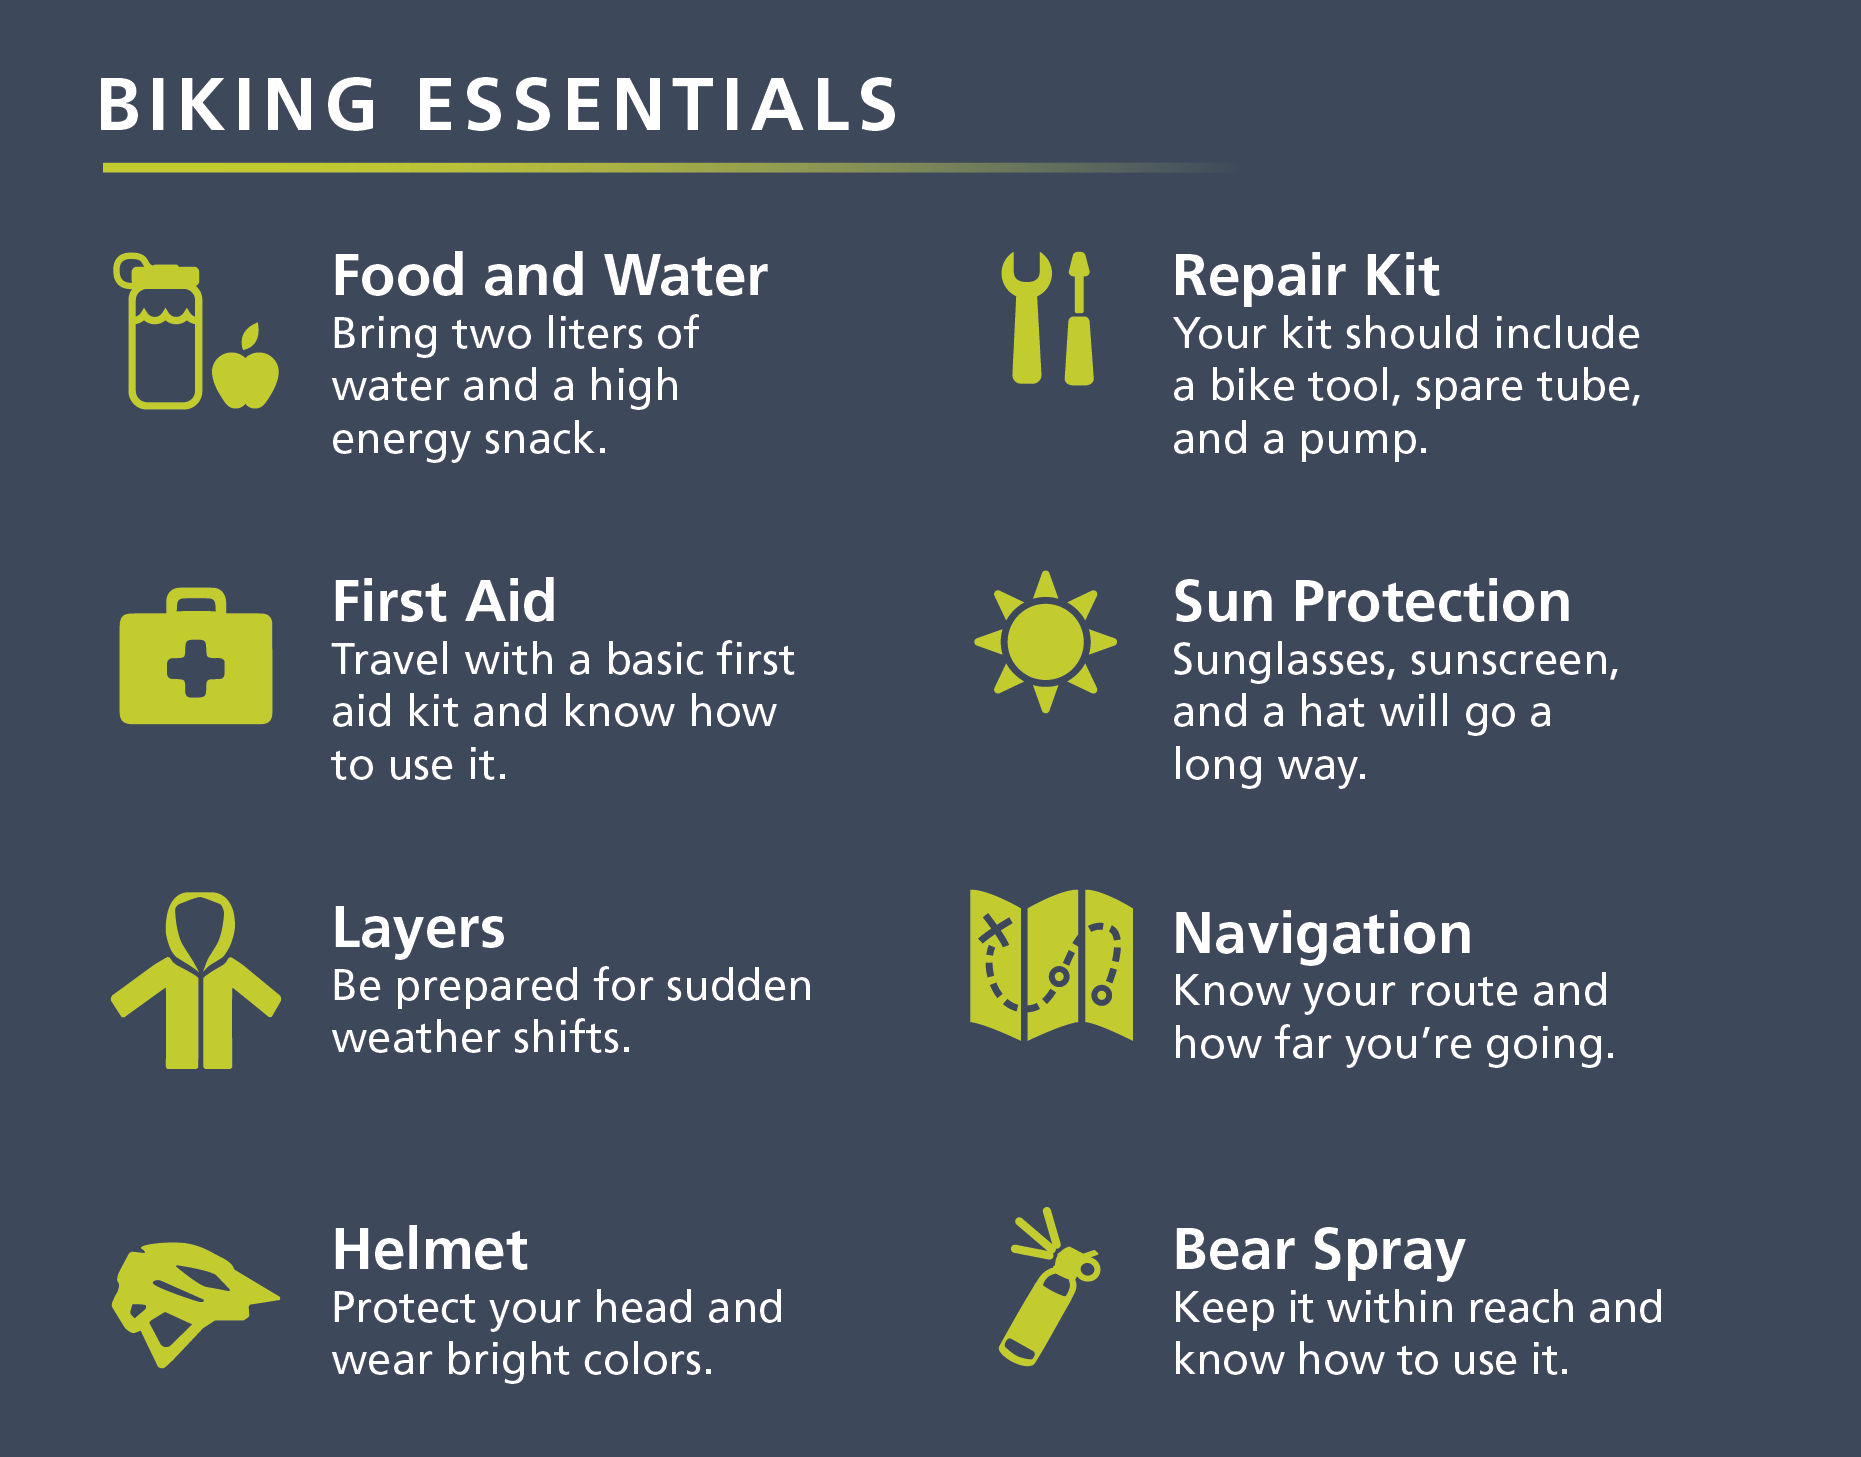 Biking Essentials Food and Water Bring two liters of water and a high energy snack. First Aid Travel with a basic first aid kit and know how to use it. Layers Be prepared for sudden weather shifts. Helmet Protect your head and wear bright colors. Repair K